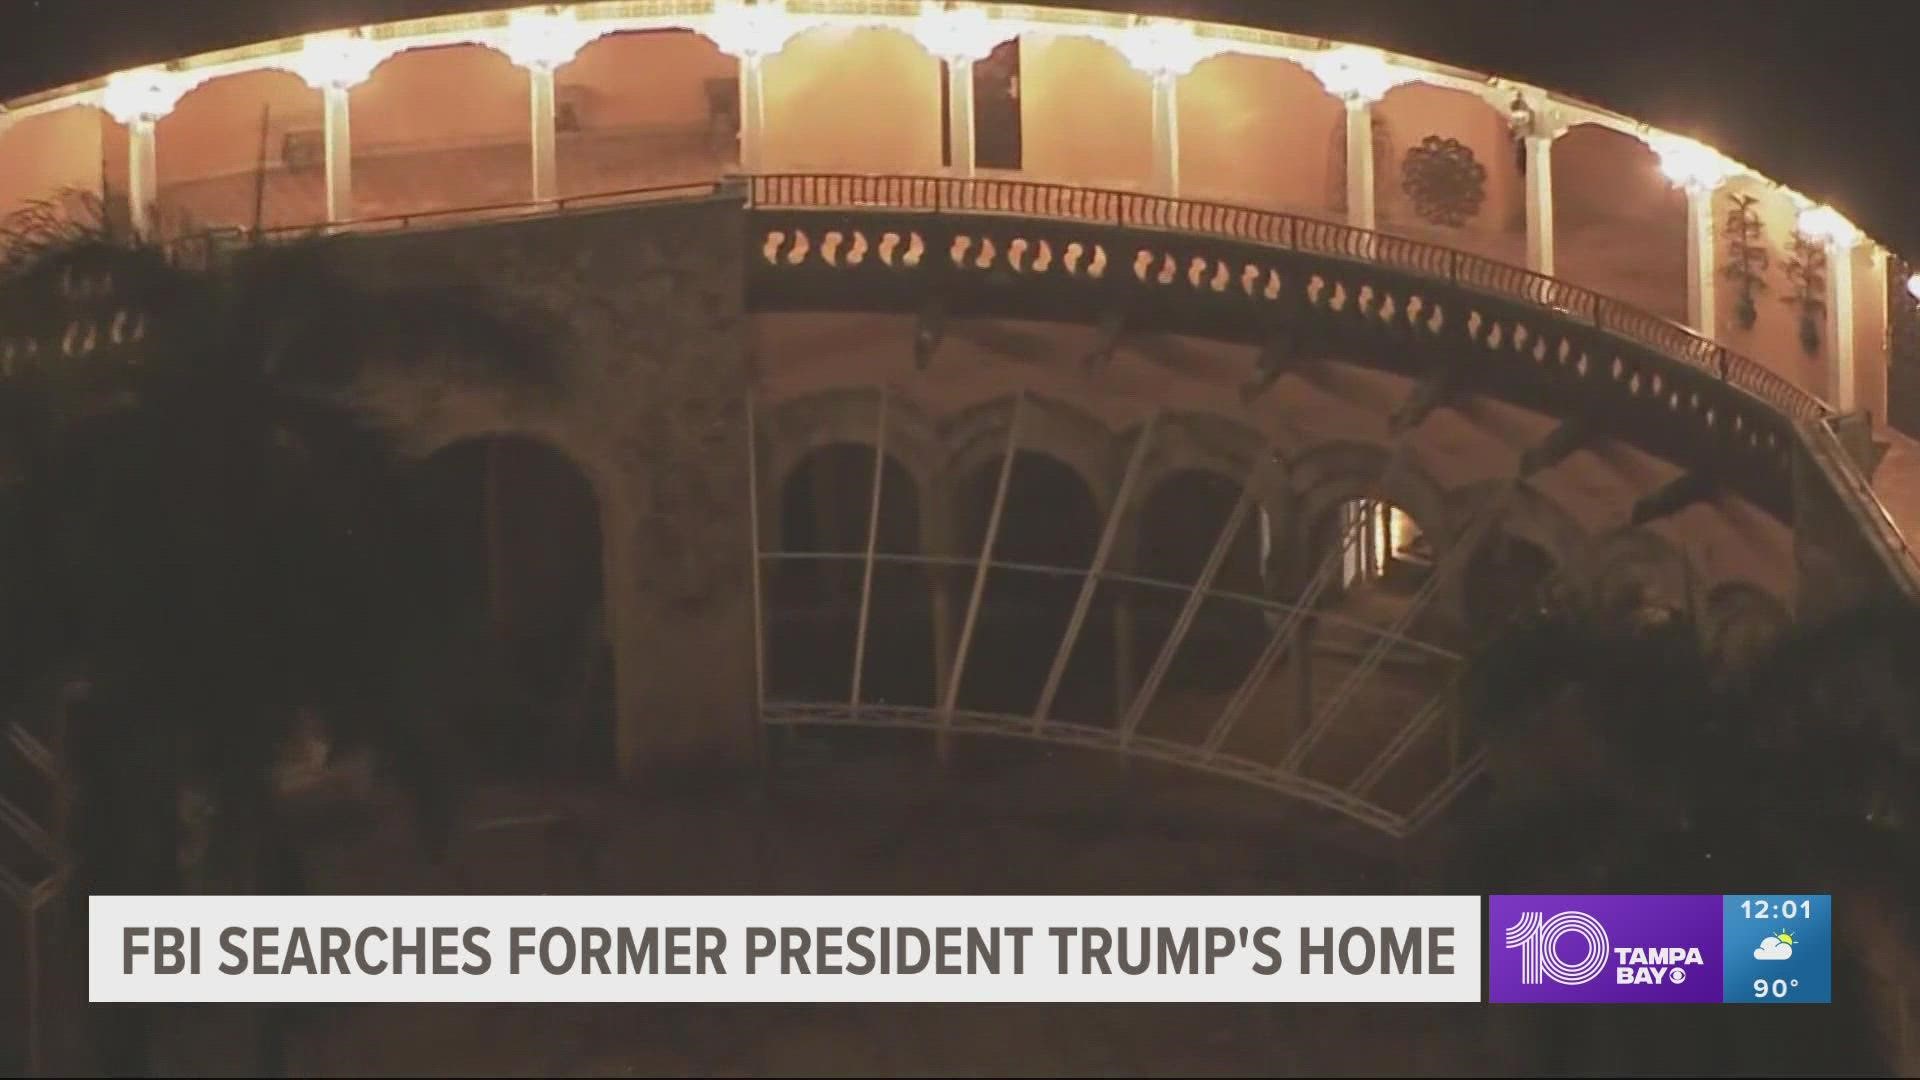 An AP source said the search was related to a probe of whether Trump had taken classified records from his White House tenure to his Florida estate.